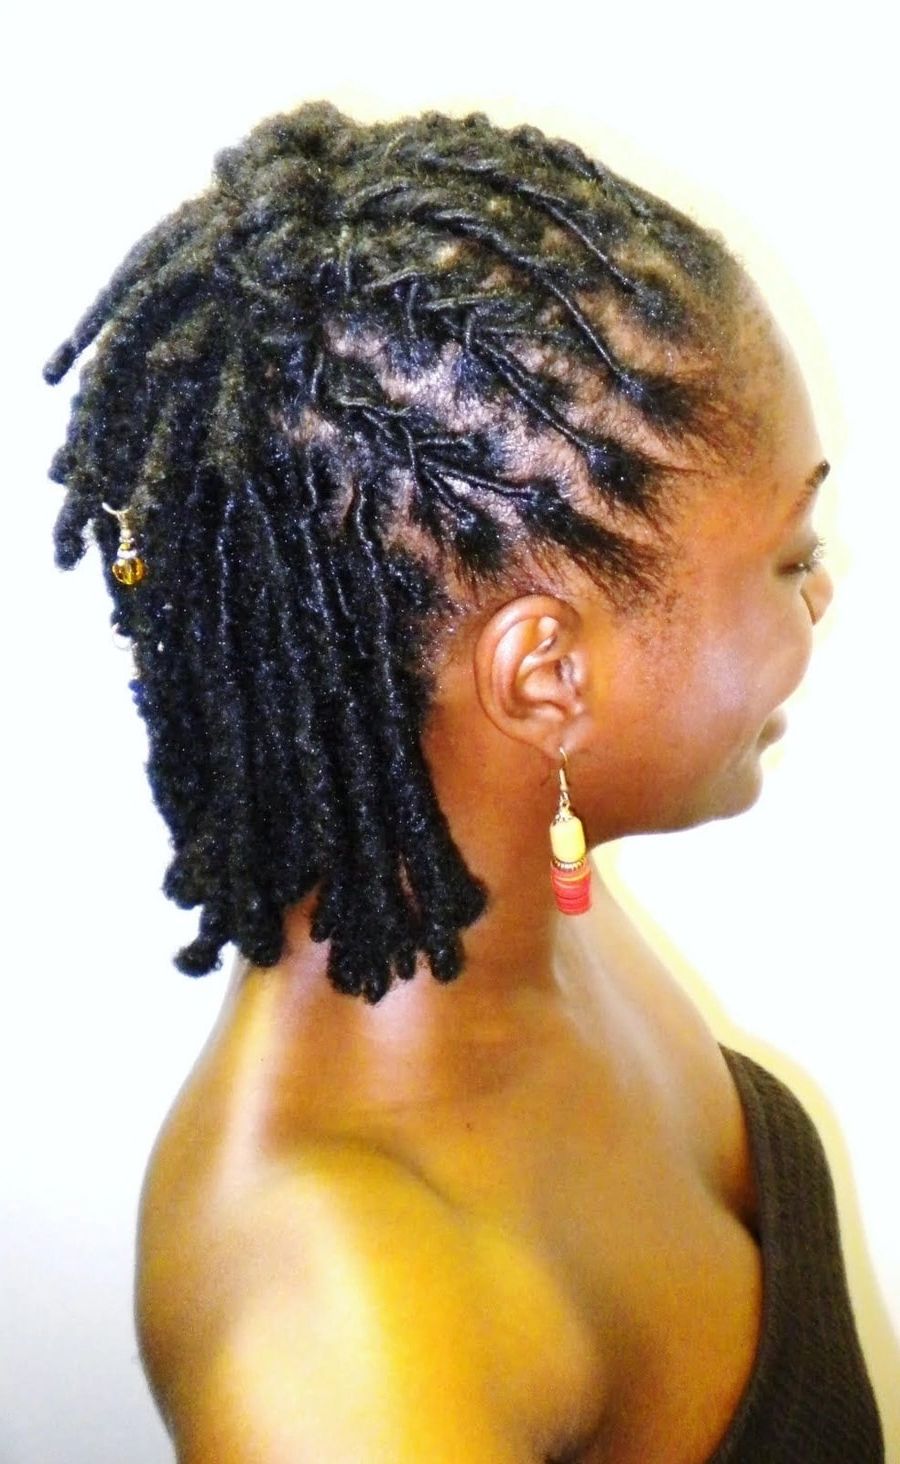 Famous Dreadlocks Hairstyles For Women Throughout Dreadlocks Hairstyles For Women – Best Dreadlock Styles To Rock In (View 12 of 15)